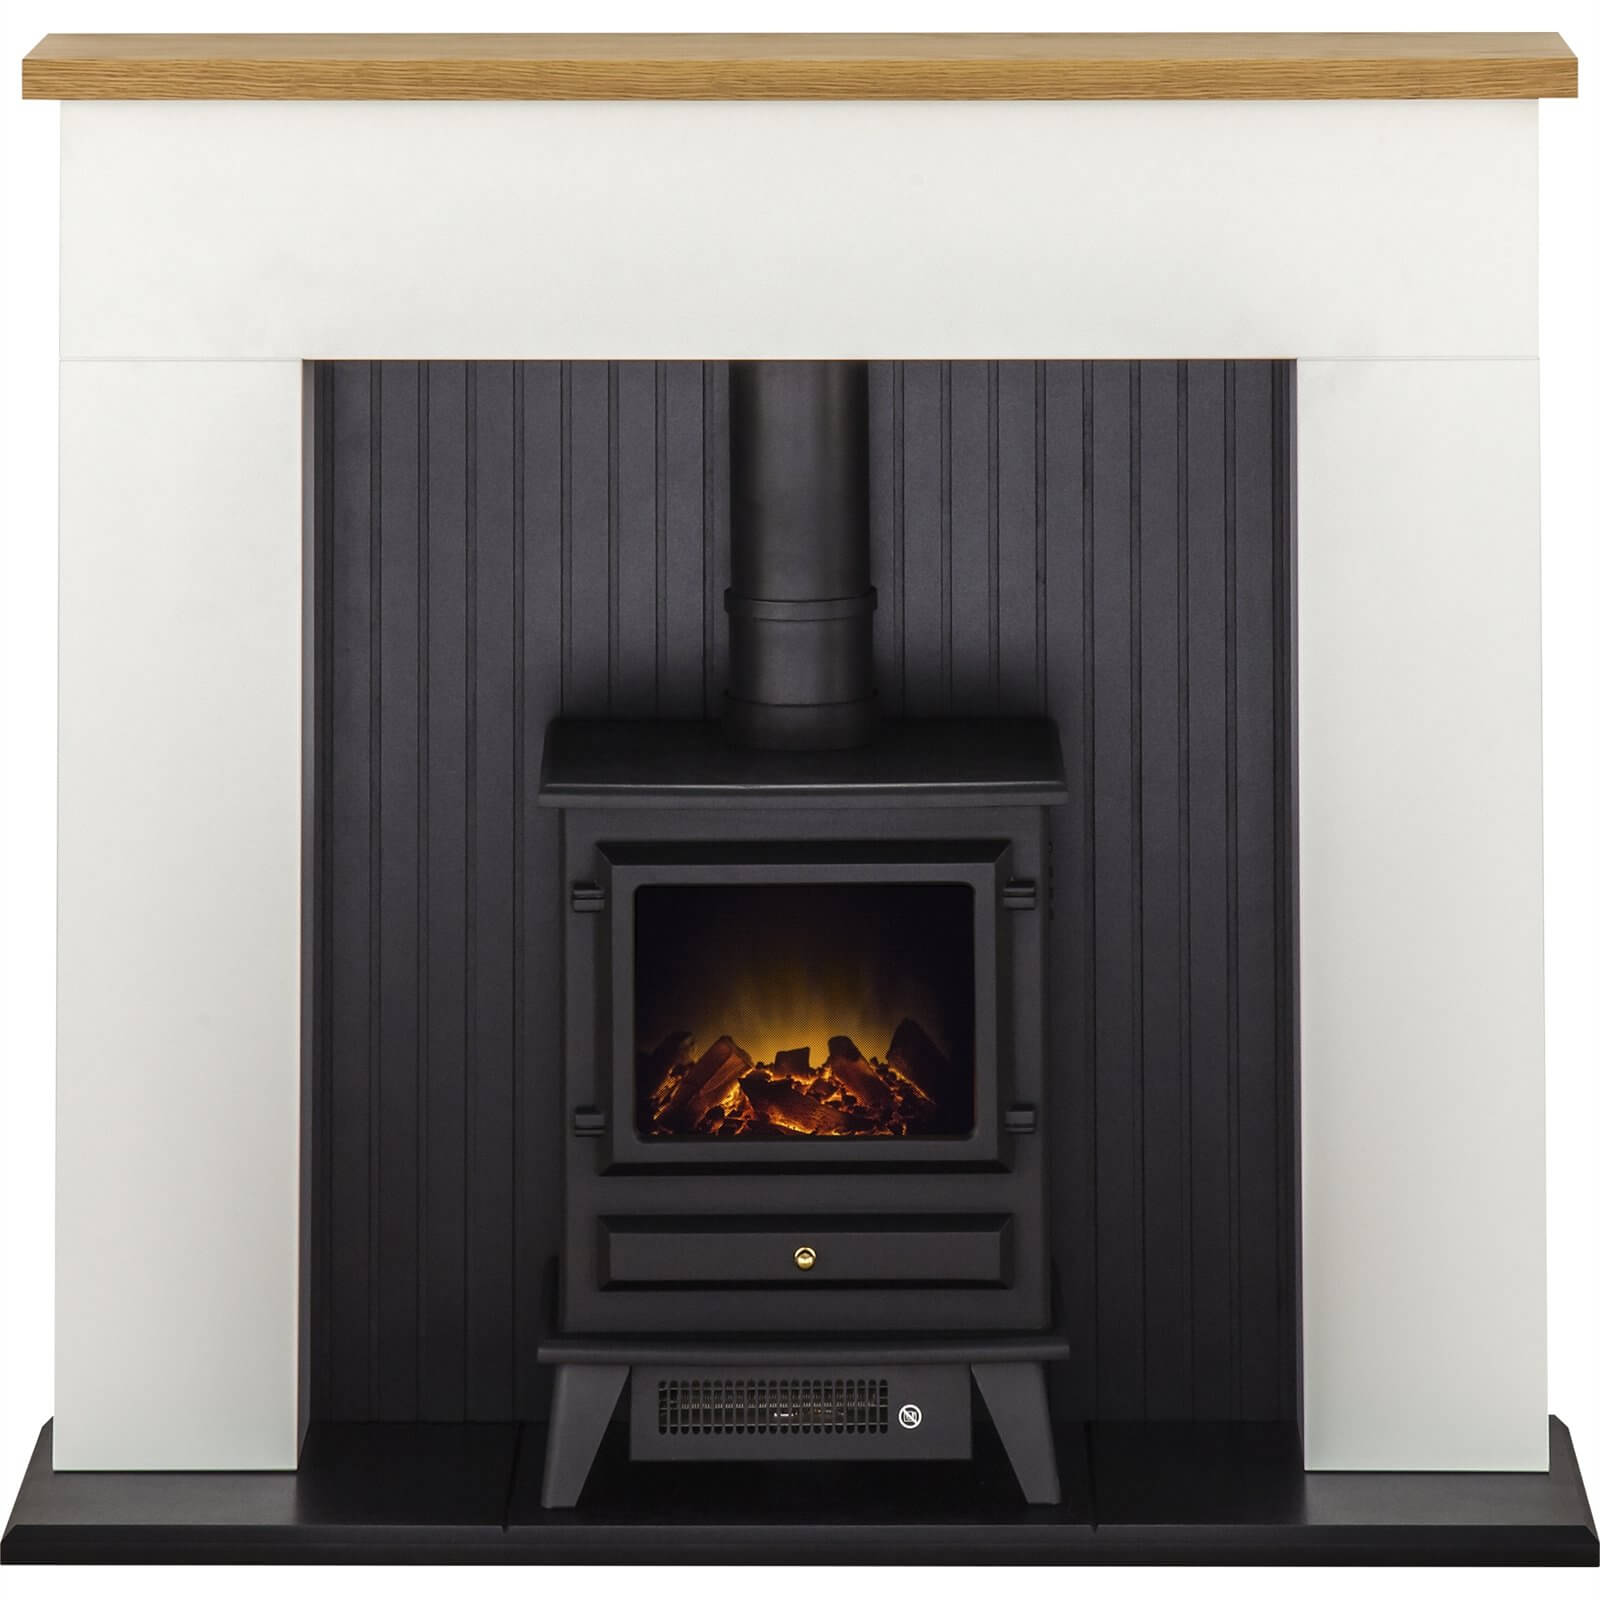 Adam Innsbruck Fireplace Surround & Hudson Electric Stove with Flat to Wall Fitting - White & Black - 45 Inch